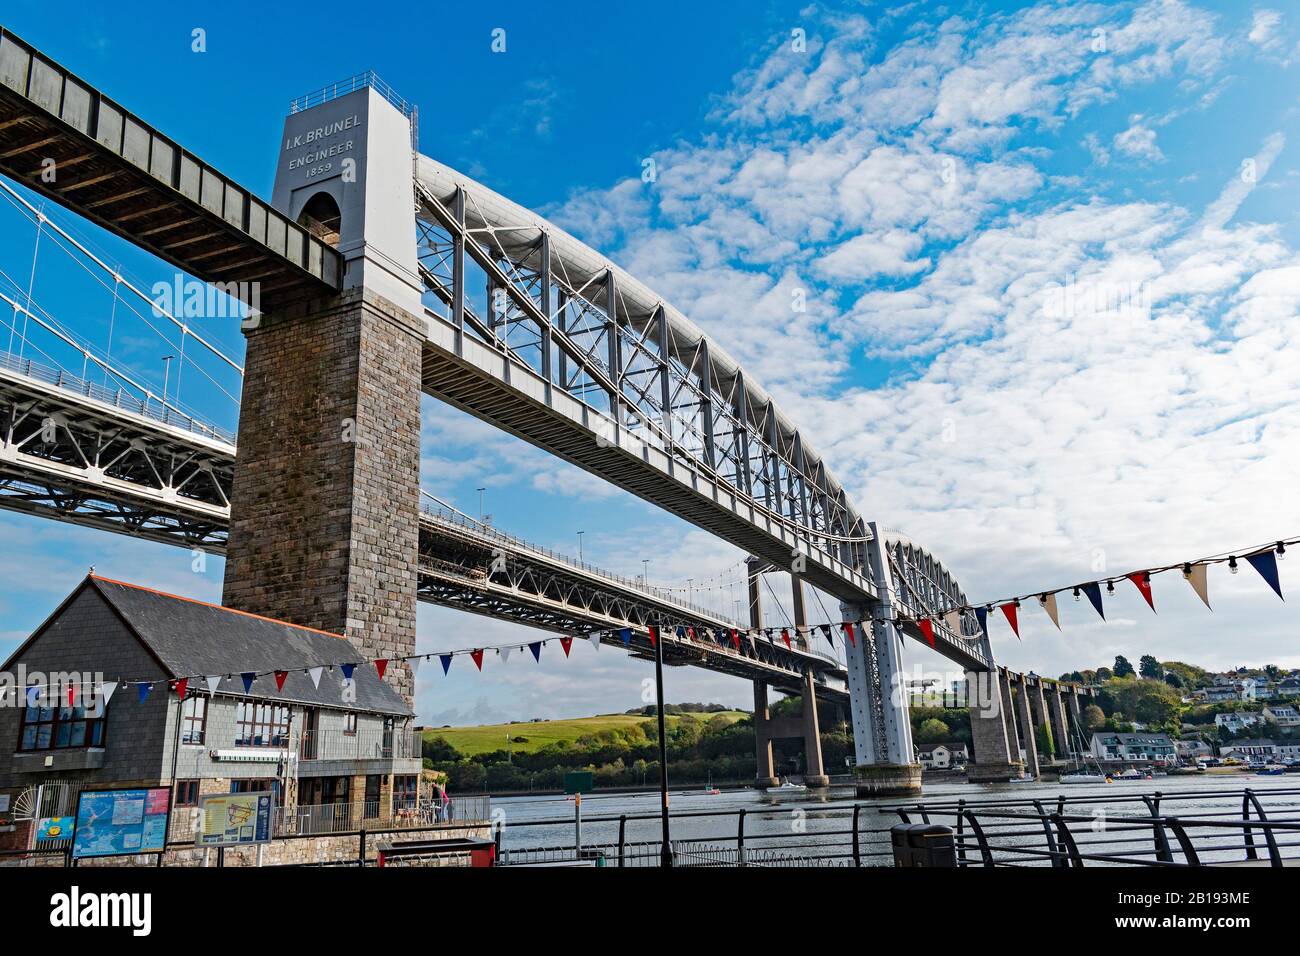 the royal albert bridge designed by isambard kingdom brunel spans the river tamer at saltash and plymouth seperating cornwall from devon, england brit Stock Photo